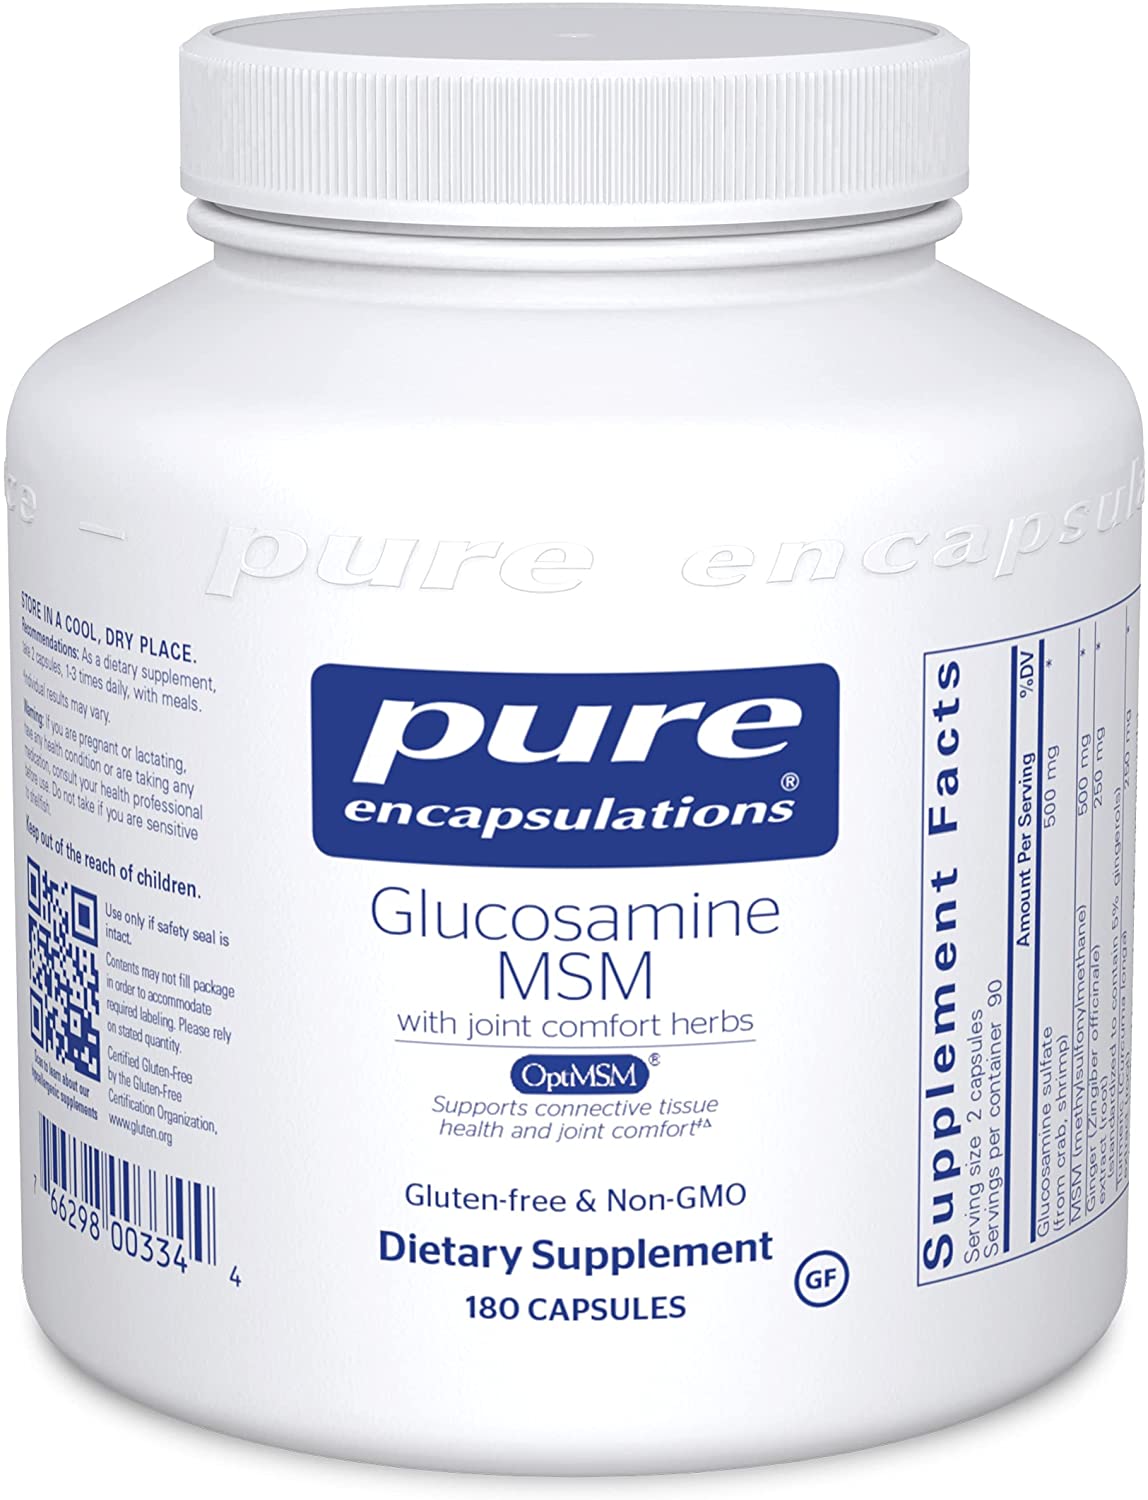 Glucosamine-MSM-with-Joint-Comfort-Herbs-180s